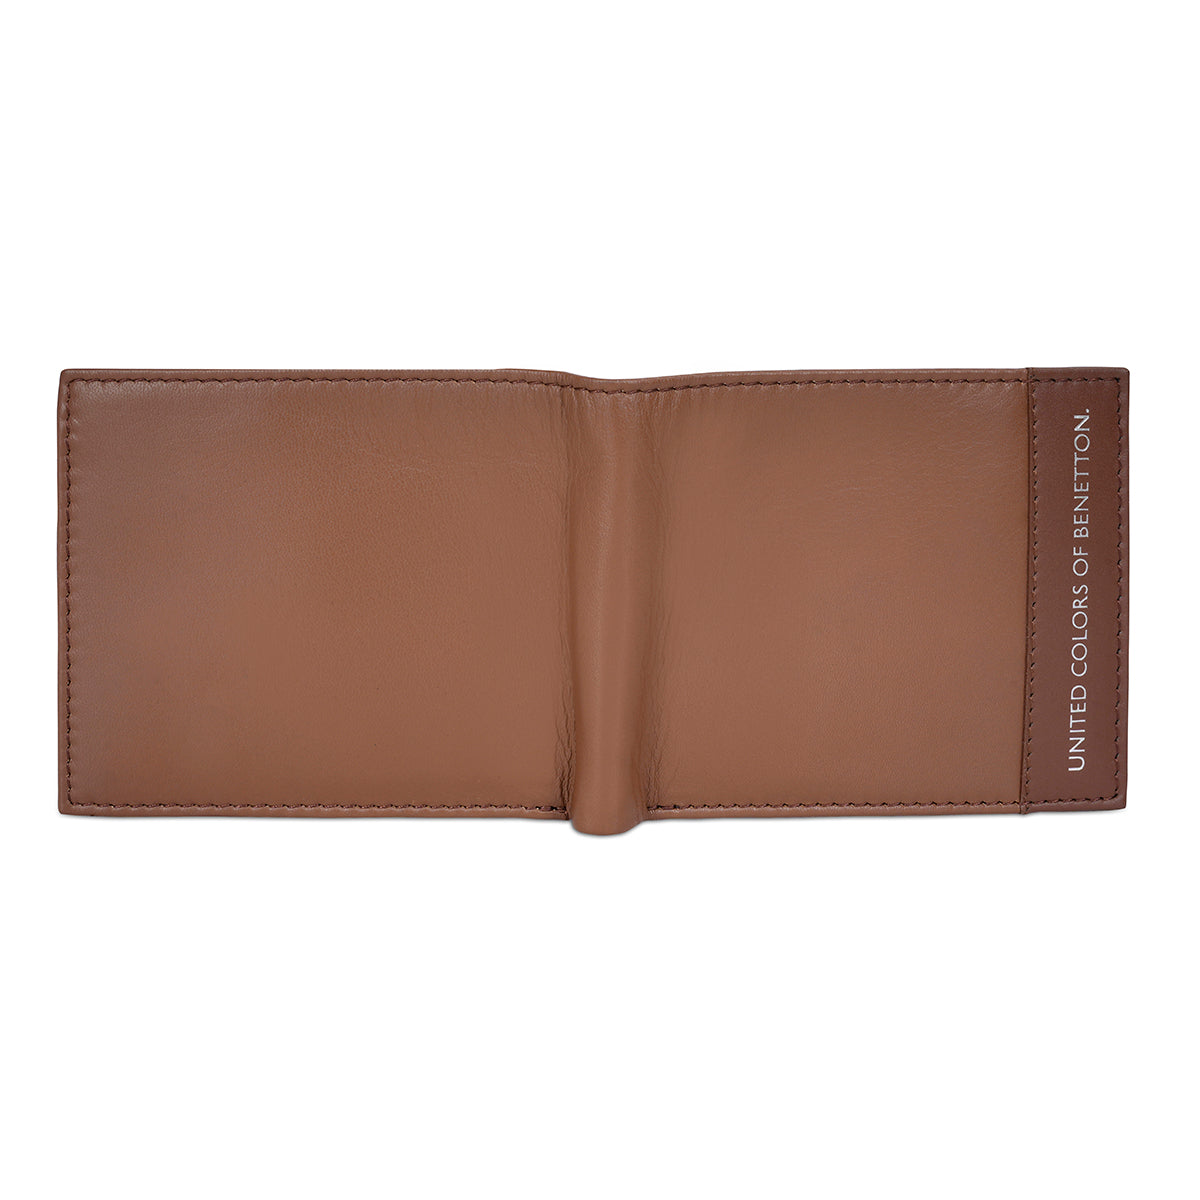 United Colors of Benetton Aroldo Global Coin Wallet Brown